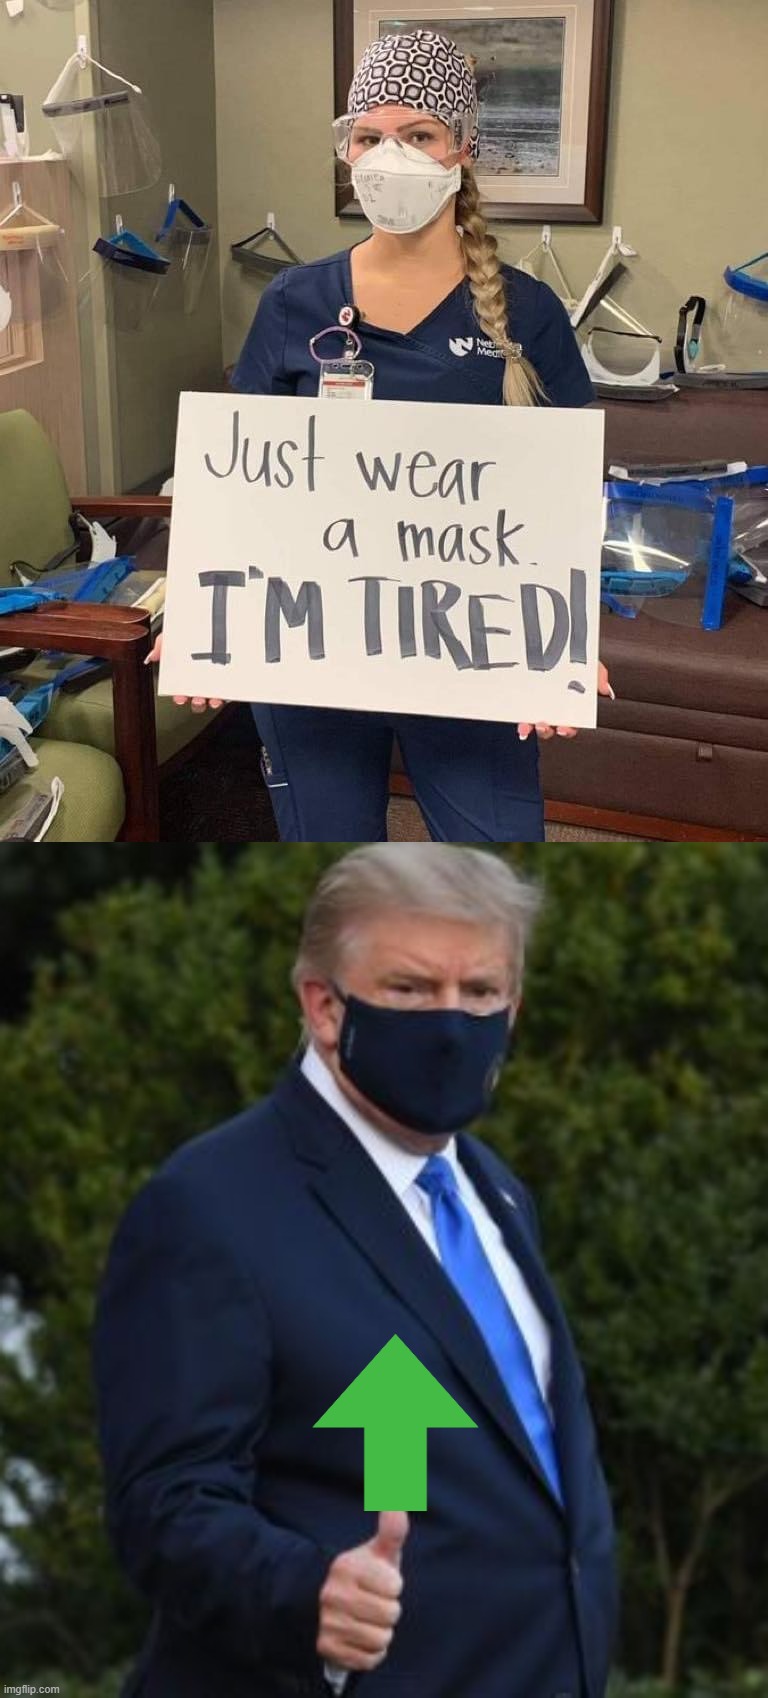 Give this poor nurse a break & wear a face mask - Trump-approved! | image tagged in covid nurse just wear a mask i m tired,trump mask covid-19,wear a facemask,just,like,trump | made w/ Imgflip meme maker